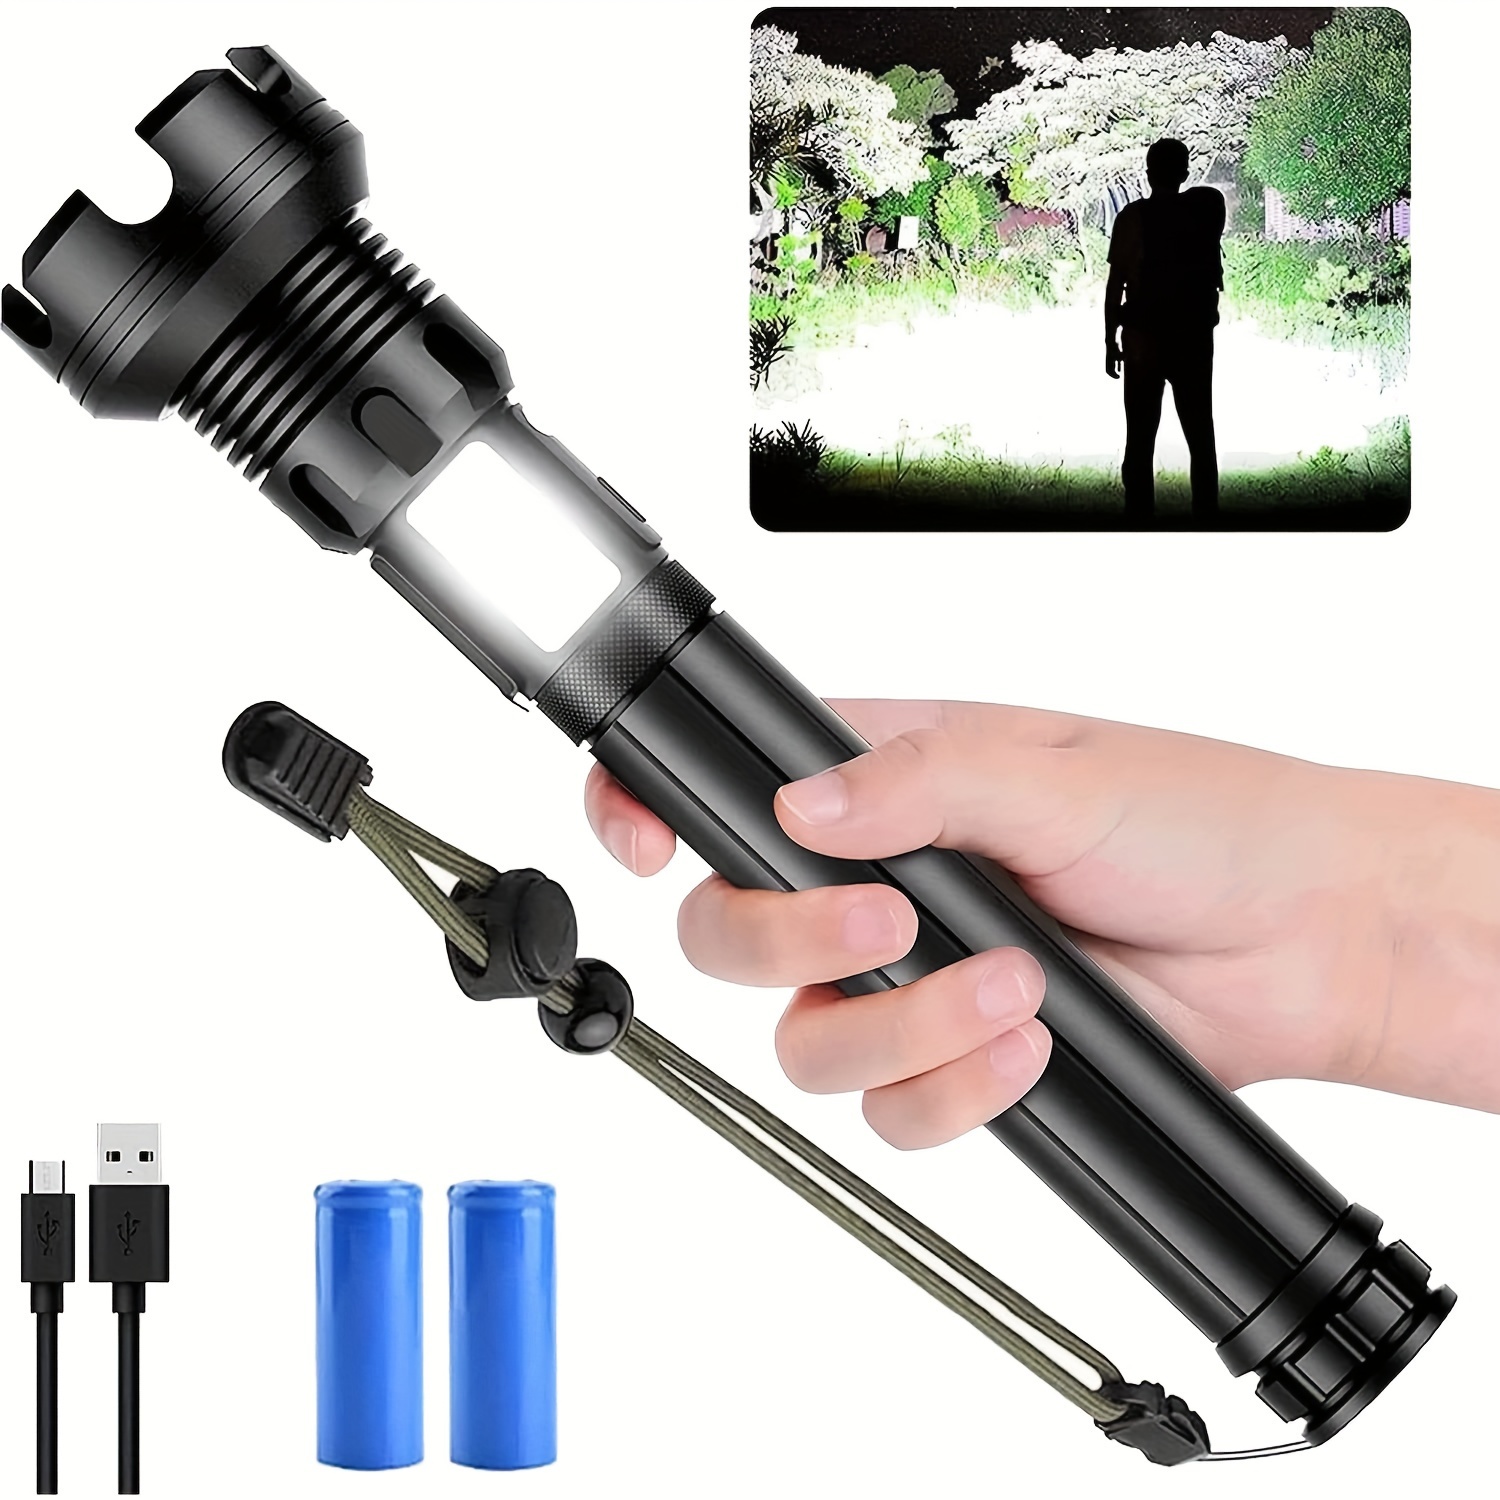 

P90 Led Rechargeable Tactical Flashlight, 90000 Lumens Xhp90, Bright With Cob Sidelight, Powerful Emergency Flashlight With Usb Output, Zoomable, 7 Modes